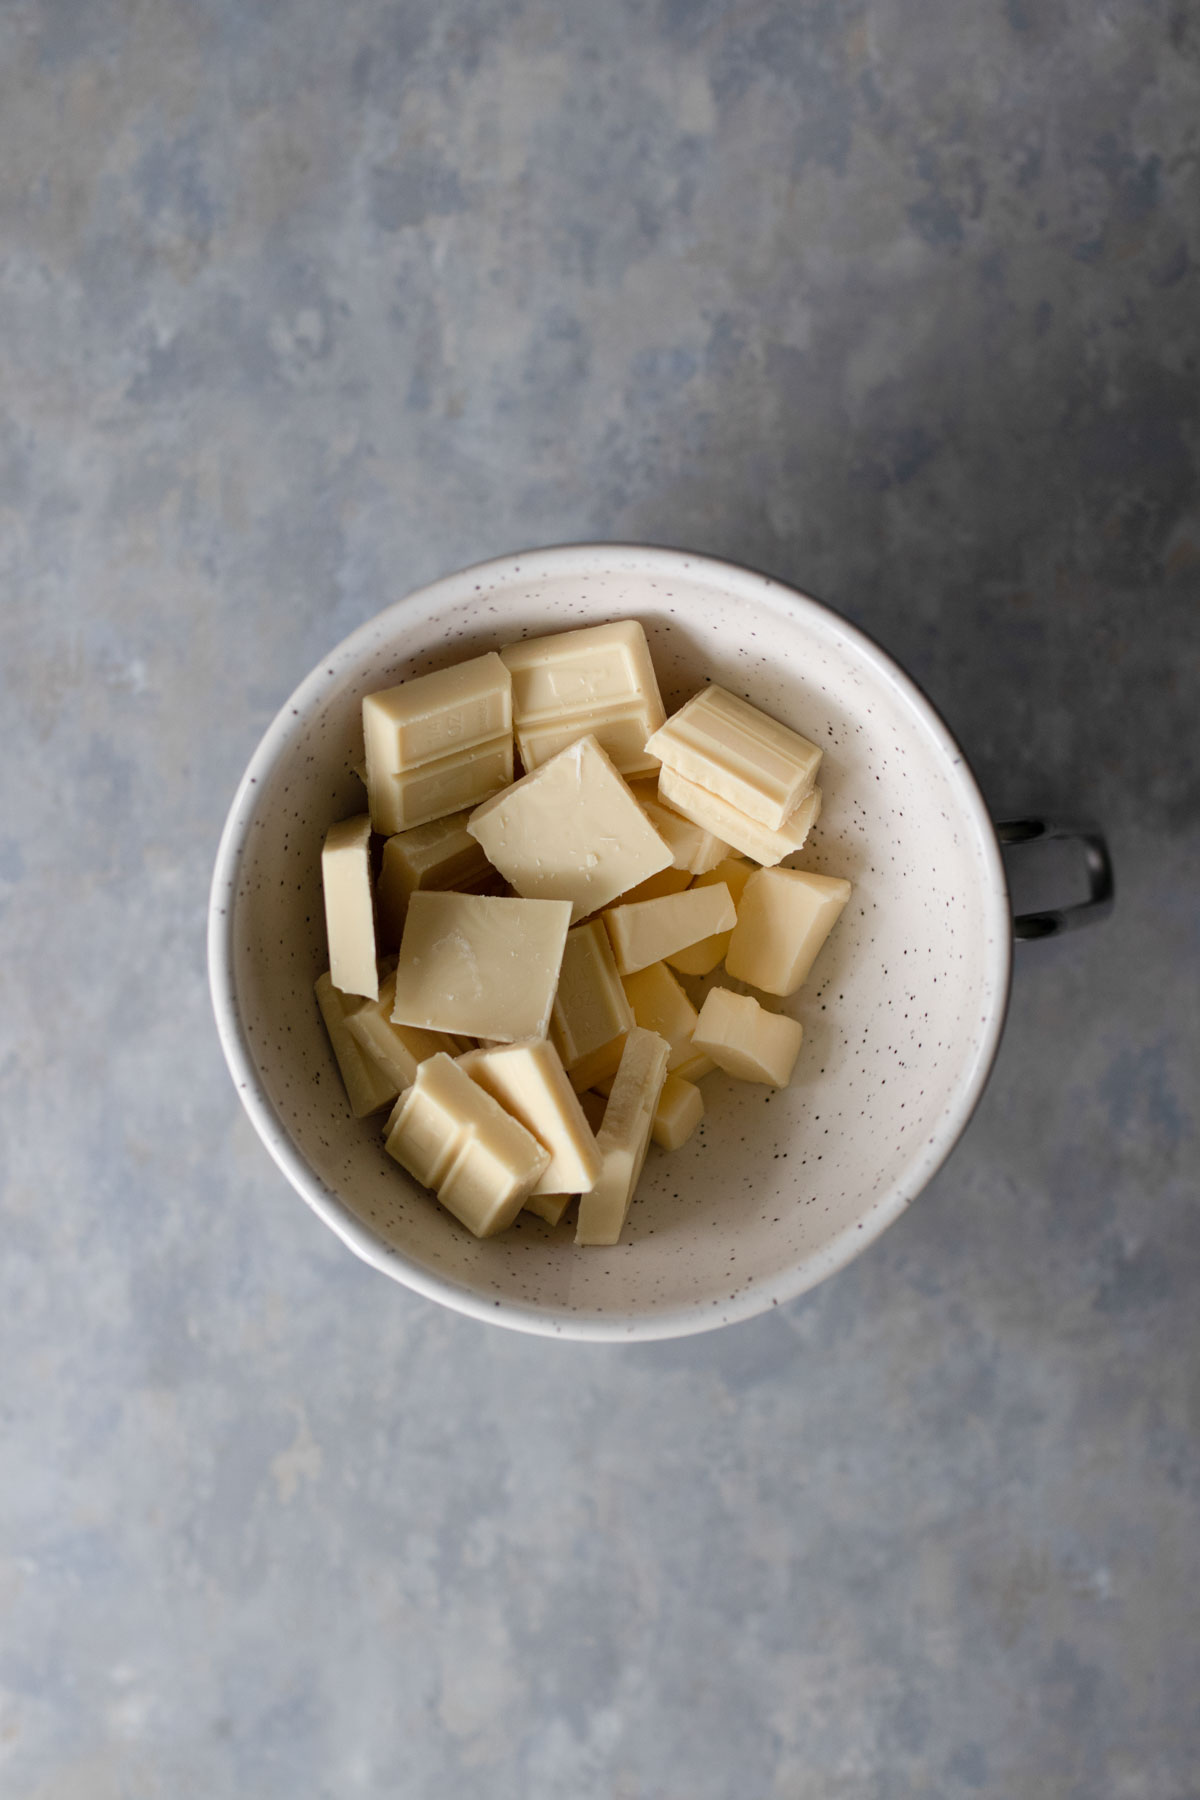 White chocolate bar pieces in a bowl.